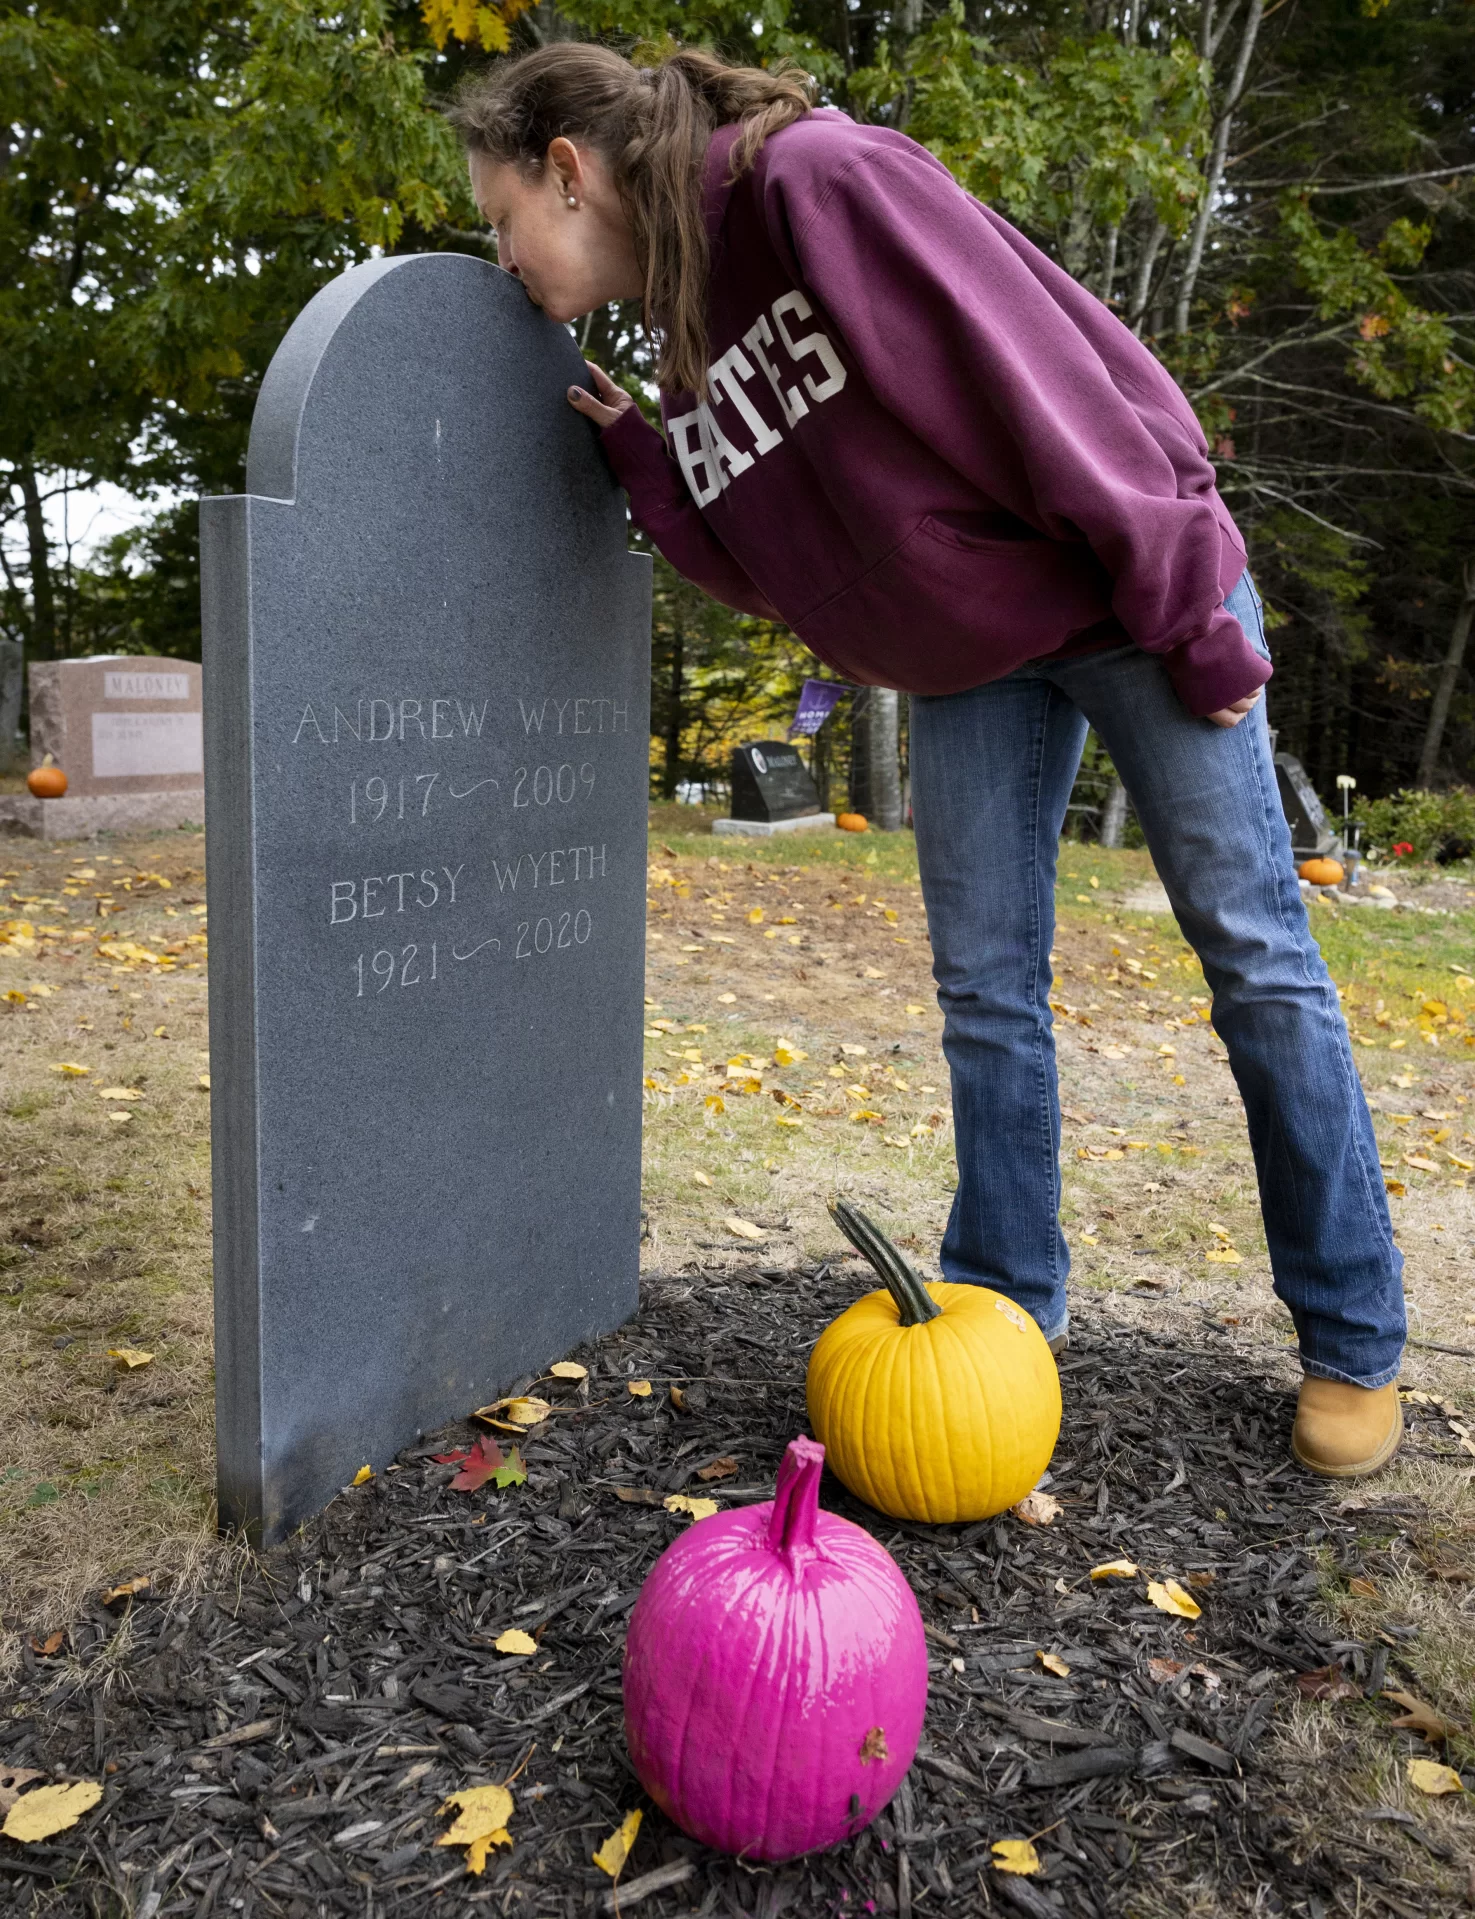 Victoria Wyeth ’01 kisses the gravestone of her grandparents Andrew and Betsy Wyeth, where she left pumpkins, in the spirit of the family's love of Halloween. (Phyllis Graber Jensen/Bates College)